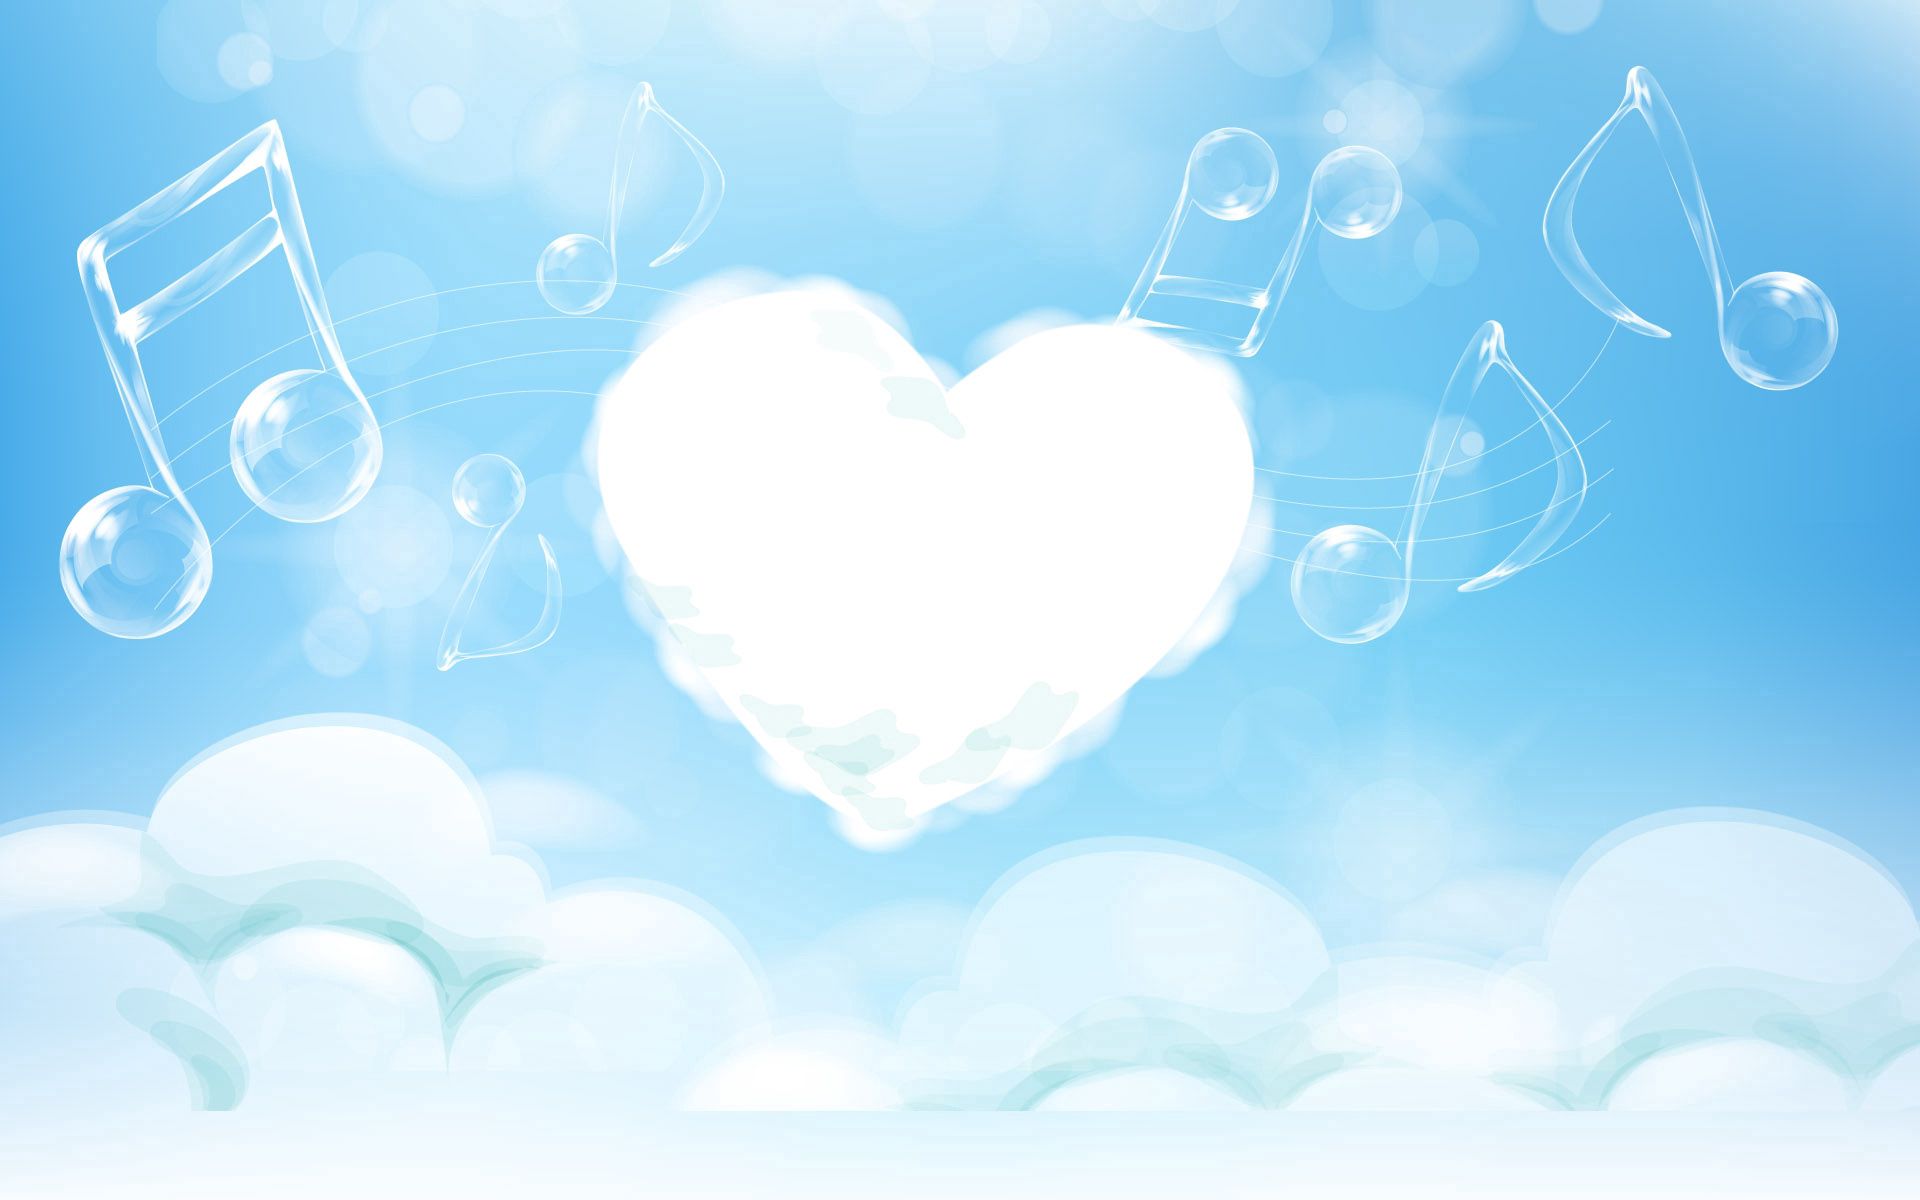 Horizontal Wallpaper music, abstract, light, light coloured, heart, notes, melody